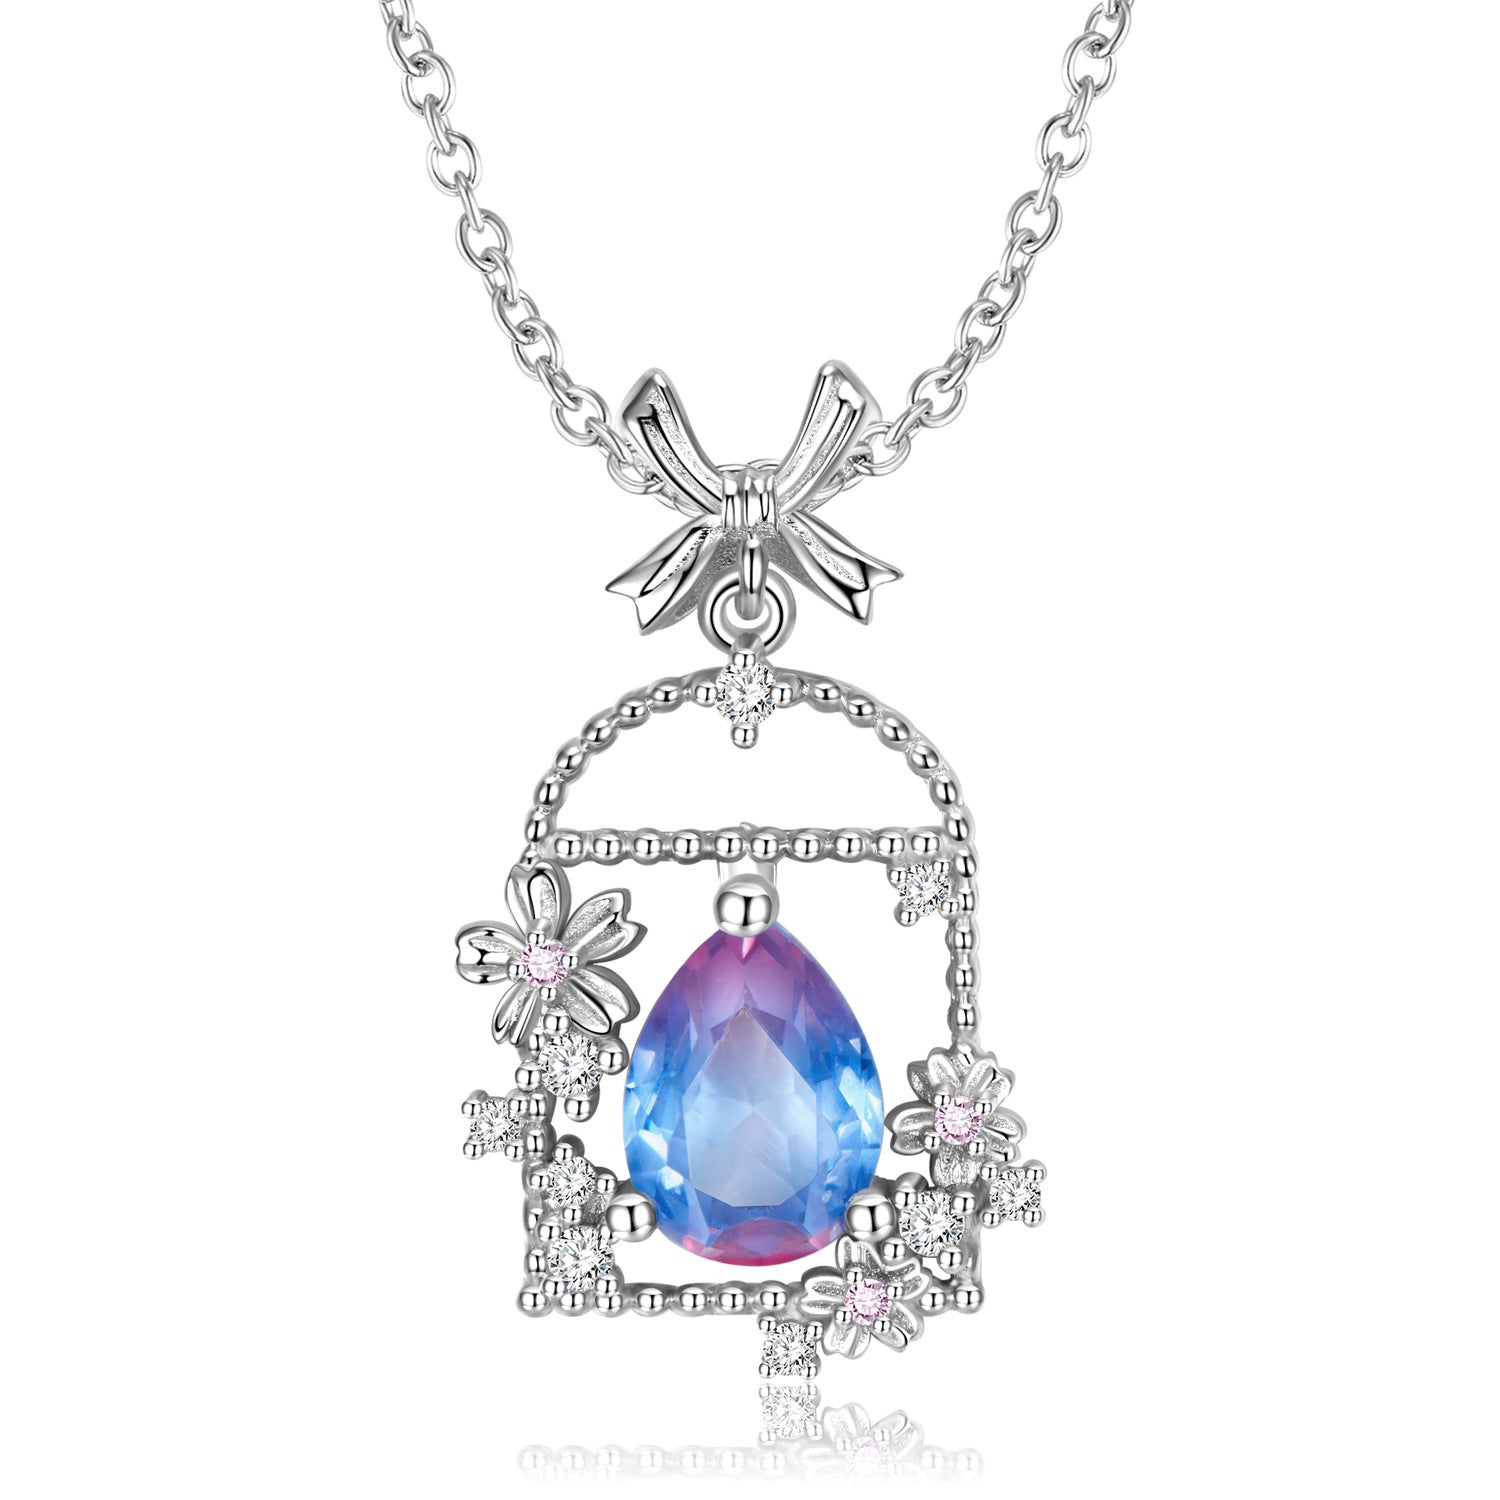 Original Simple Hollow Bowknot Crystal Garden Necklace 925 Sterling Silver